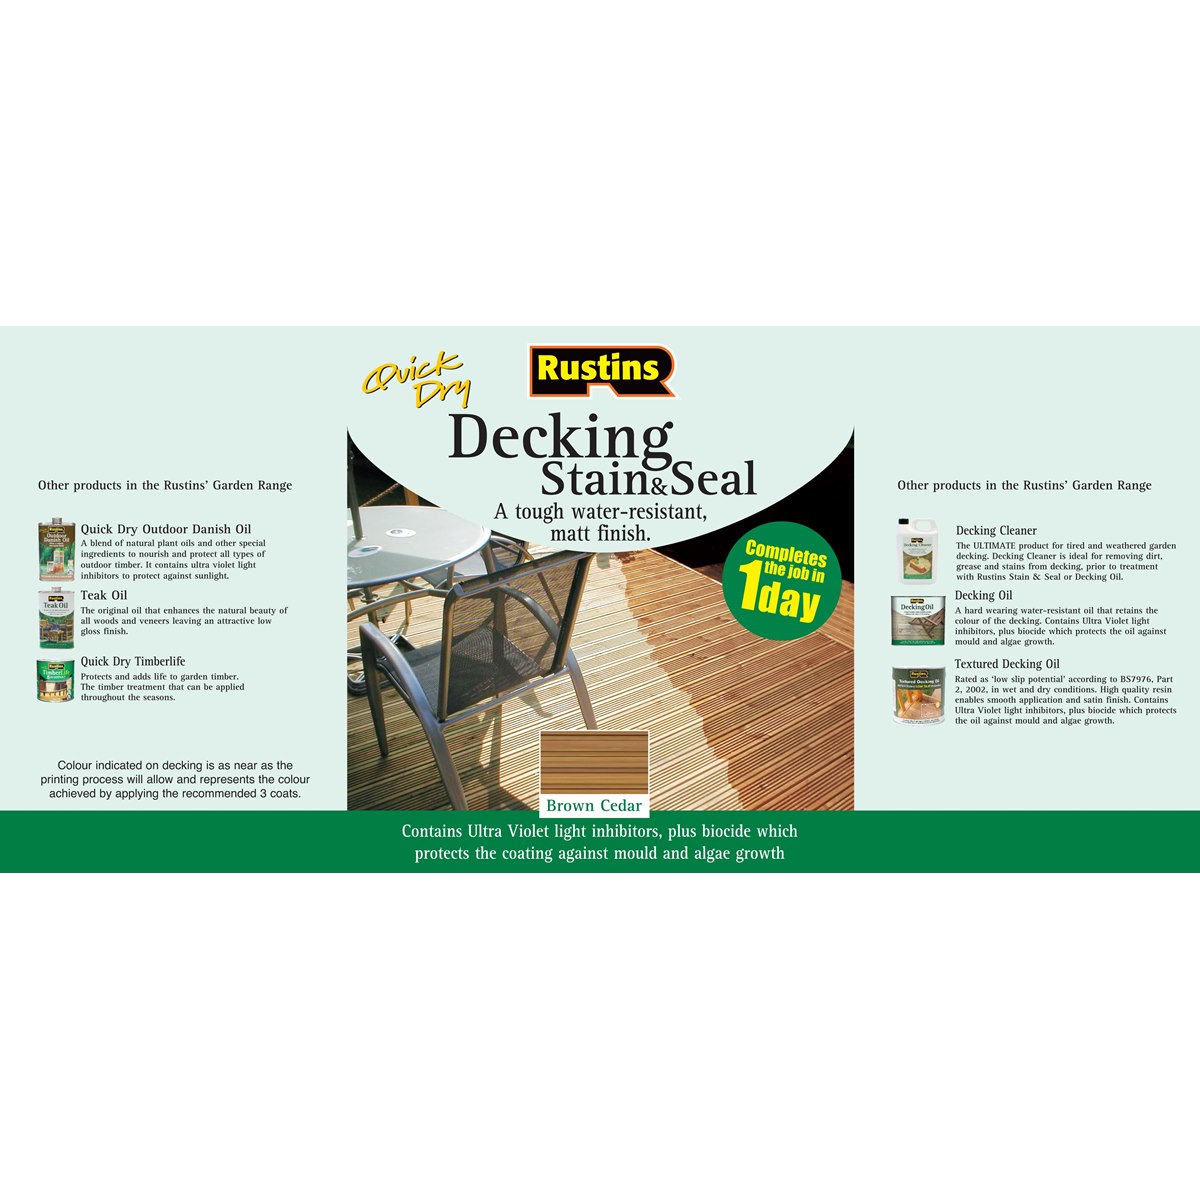 Rustins Decking Stain and Seal